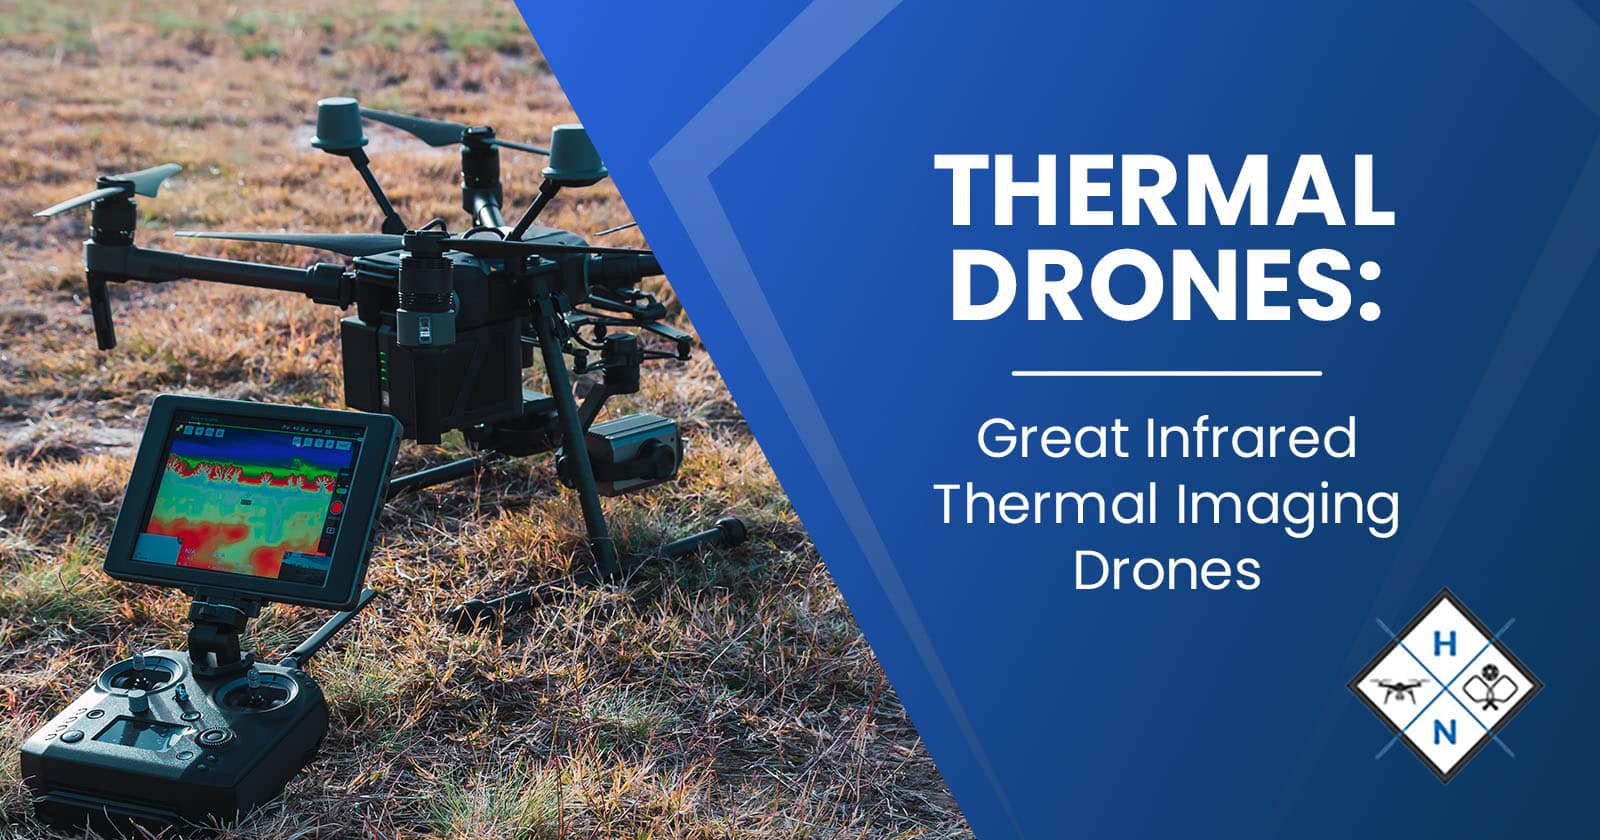 Thermal Drones: Great Infrared Thermal Imaging Drones